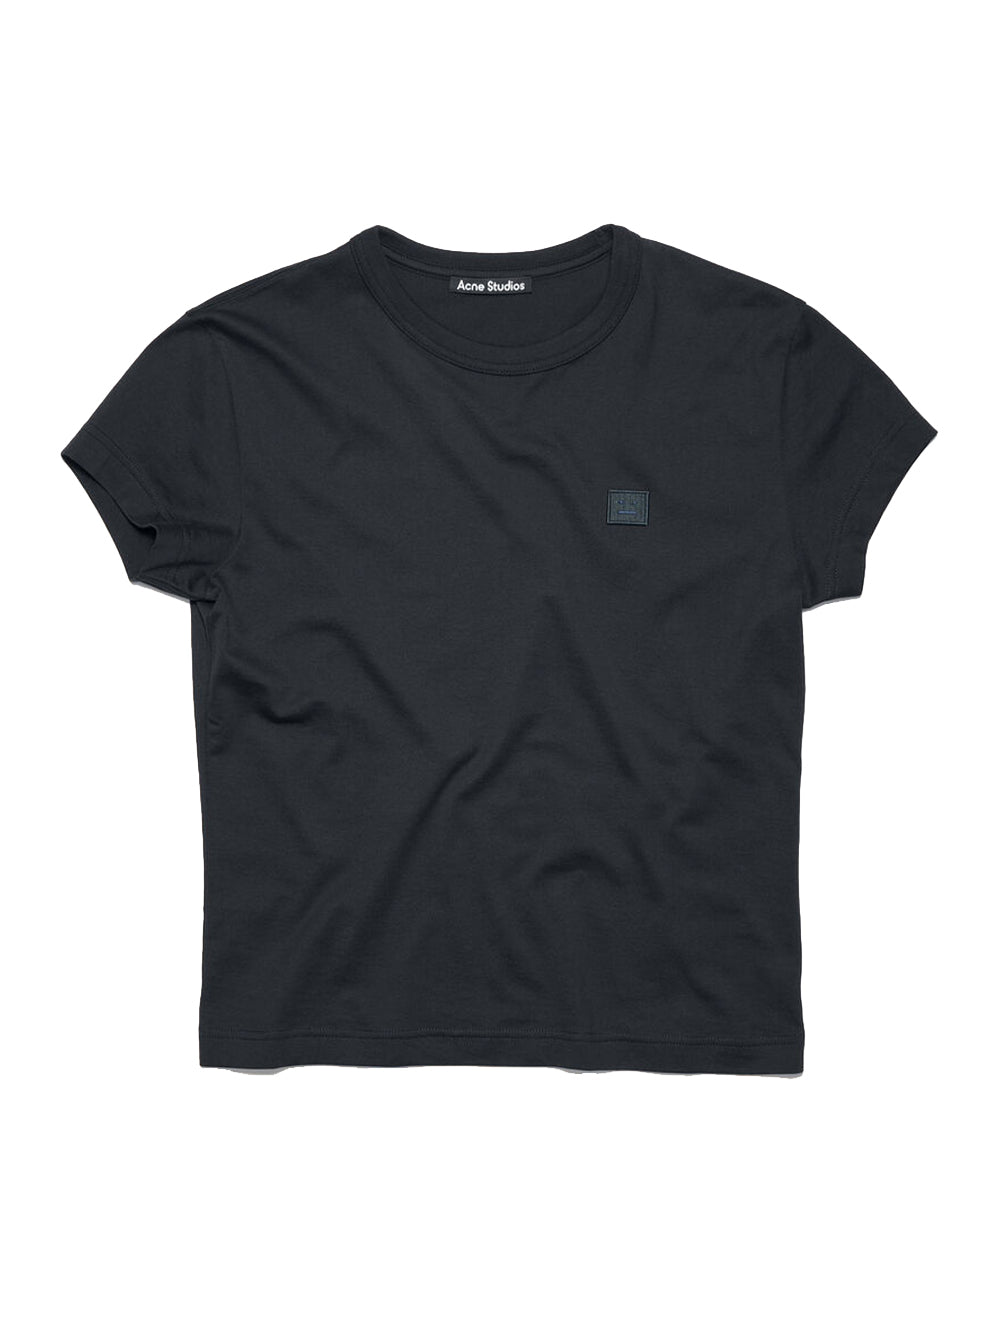 Fitted Fit Crew Neck T-Shirts (Black)